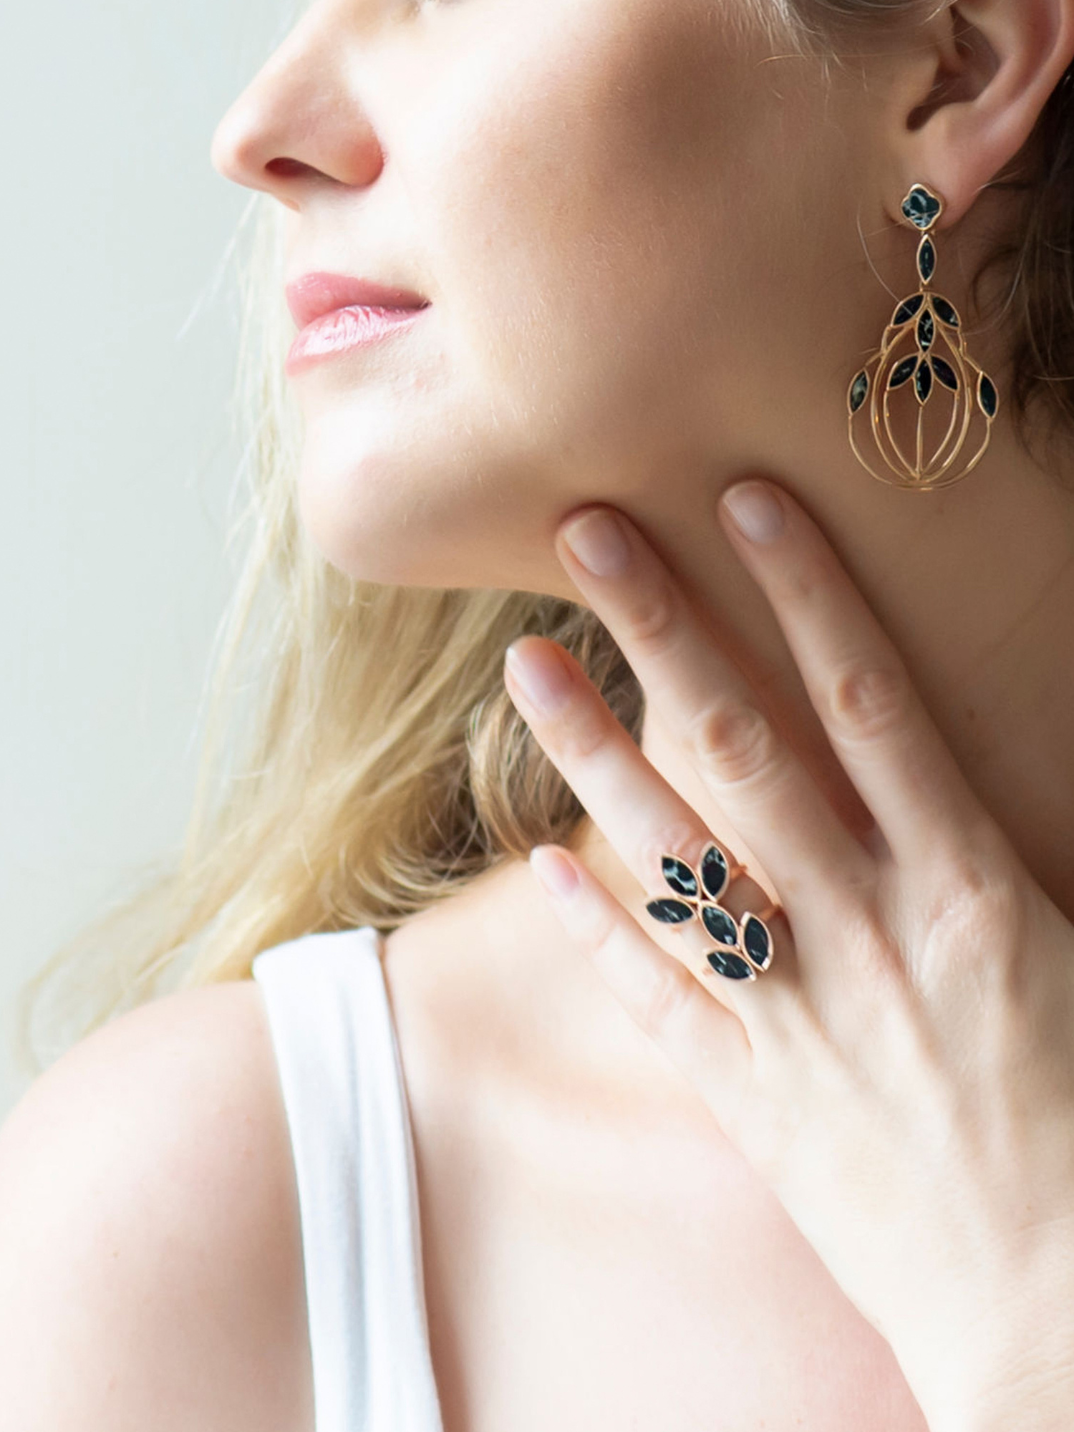 Rose Gold plated over sterling silver our floral escape ring is inlaid with hand cut black marble ceramic. Inspired by nature and floral mosaics. timeless handcrafted jewelry ethically made